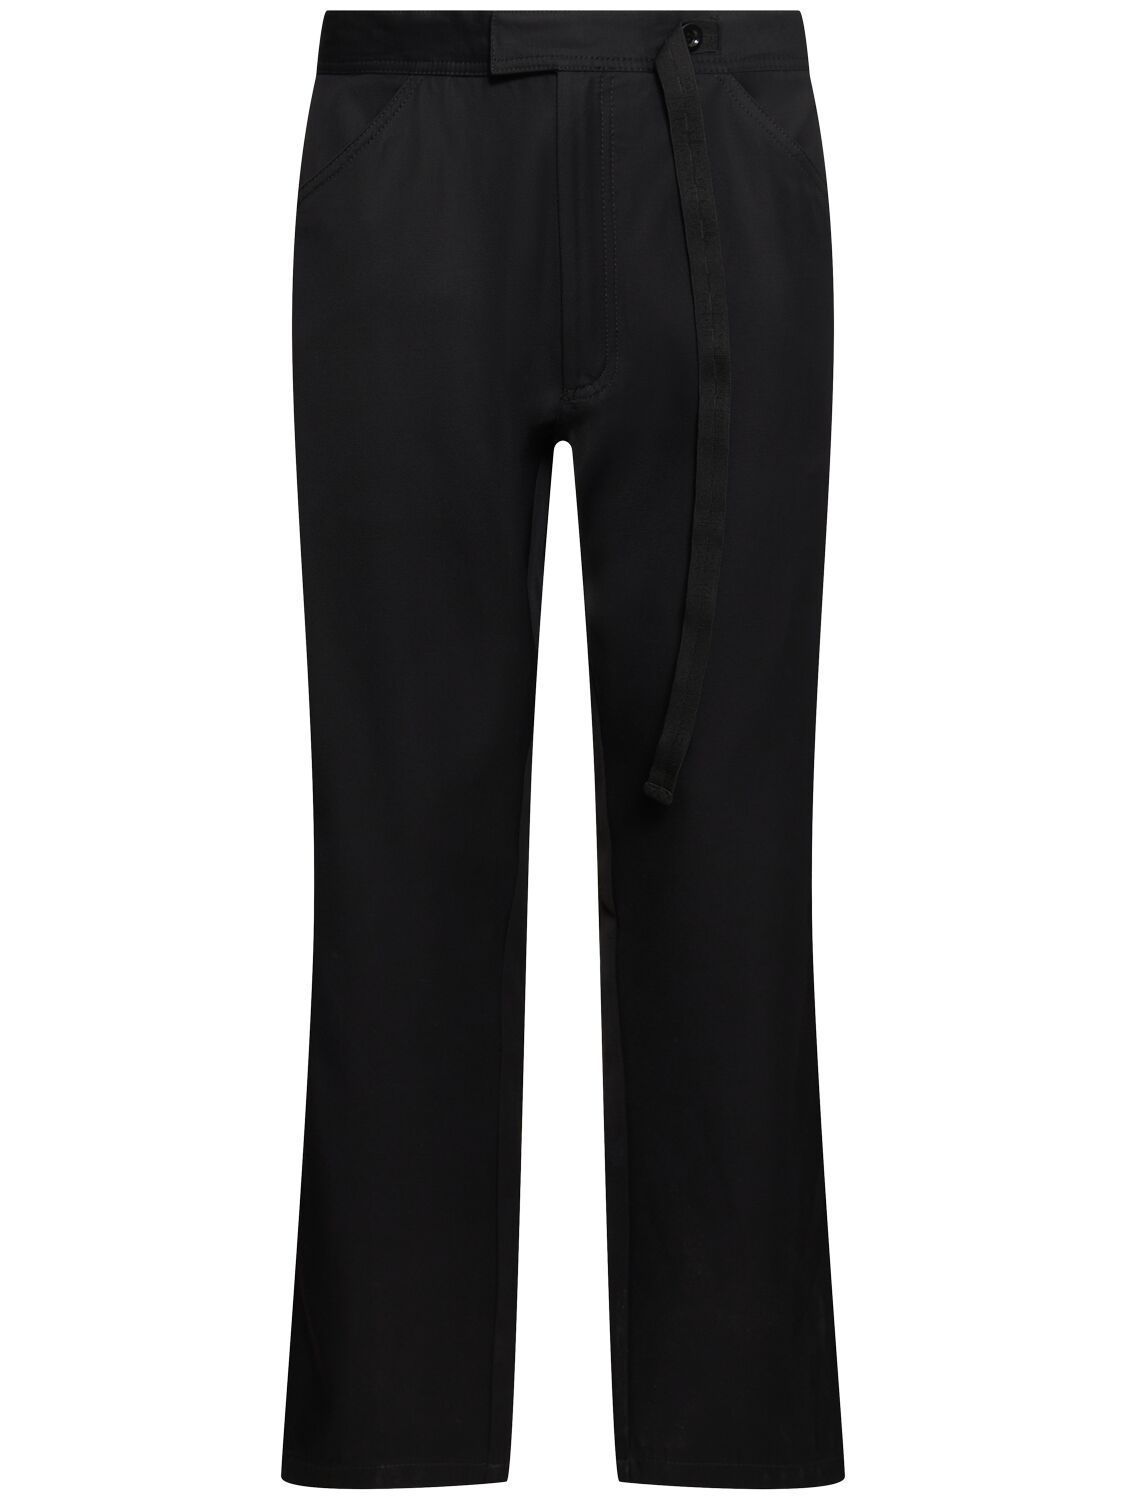 4sdesigns Viscose & Cotton Twill Formal Pants In Black